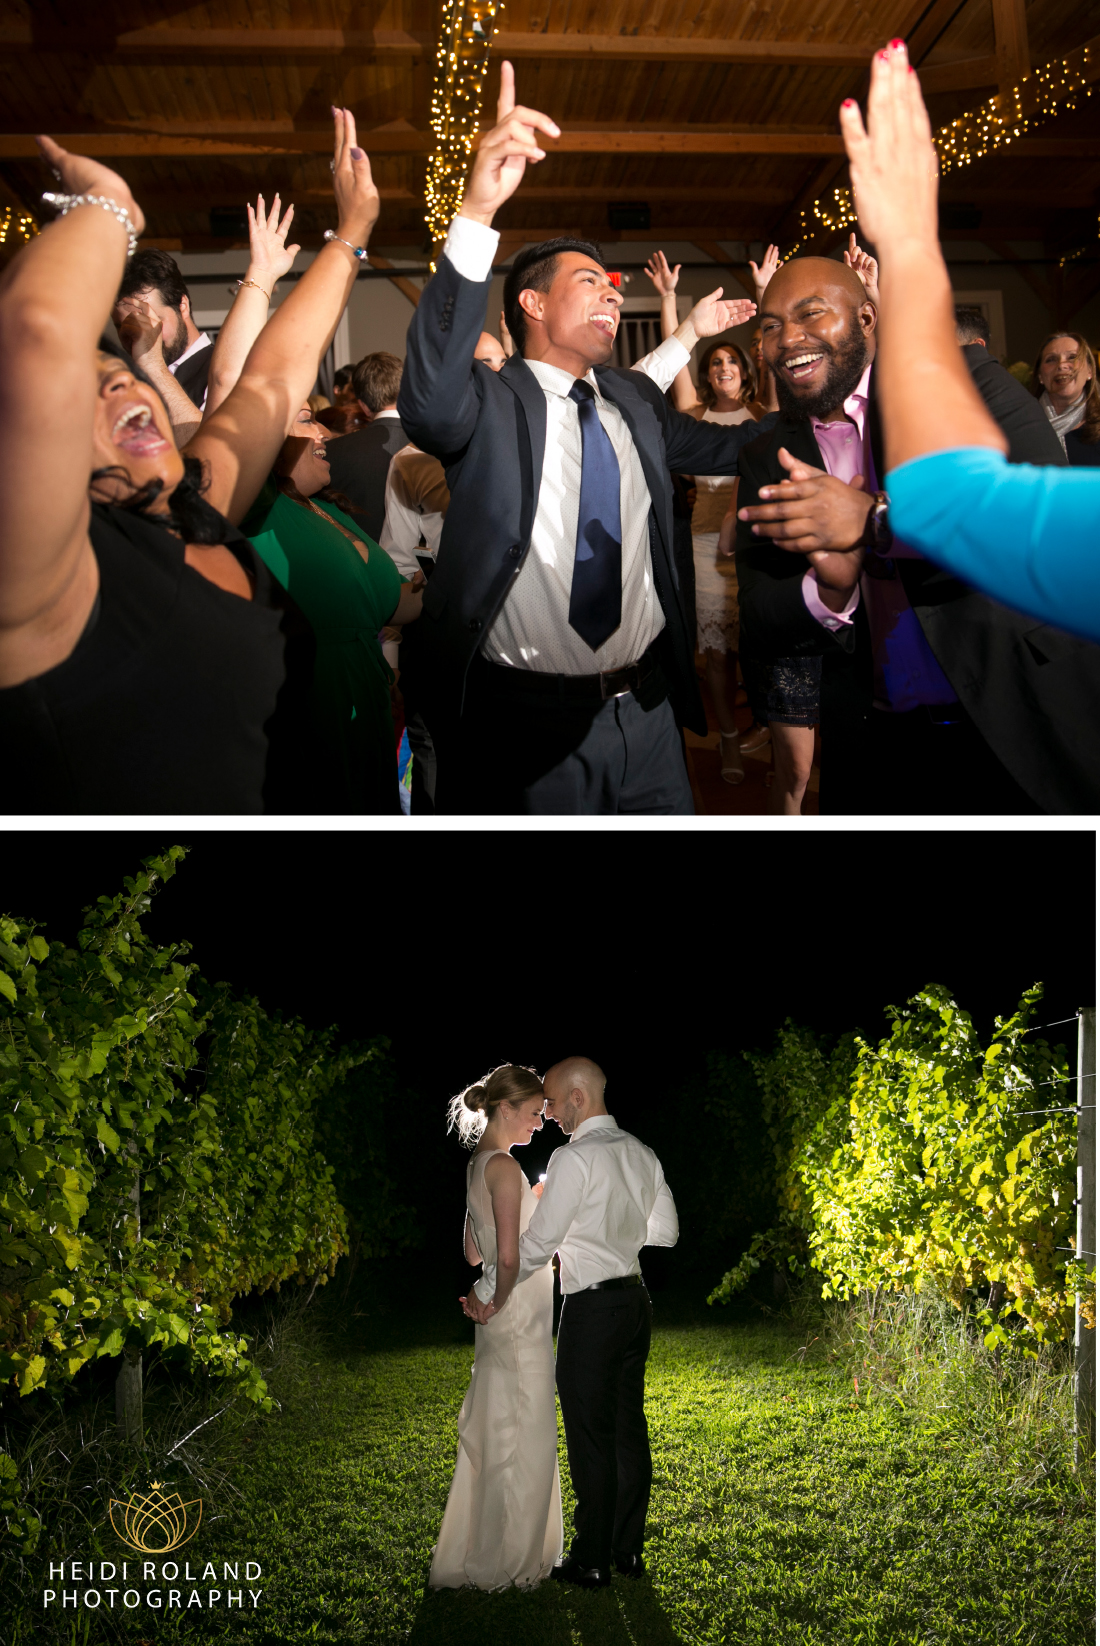 Willow Creek Winery wedding reception dancing and bride and groom night photo